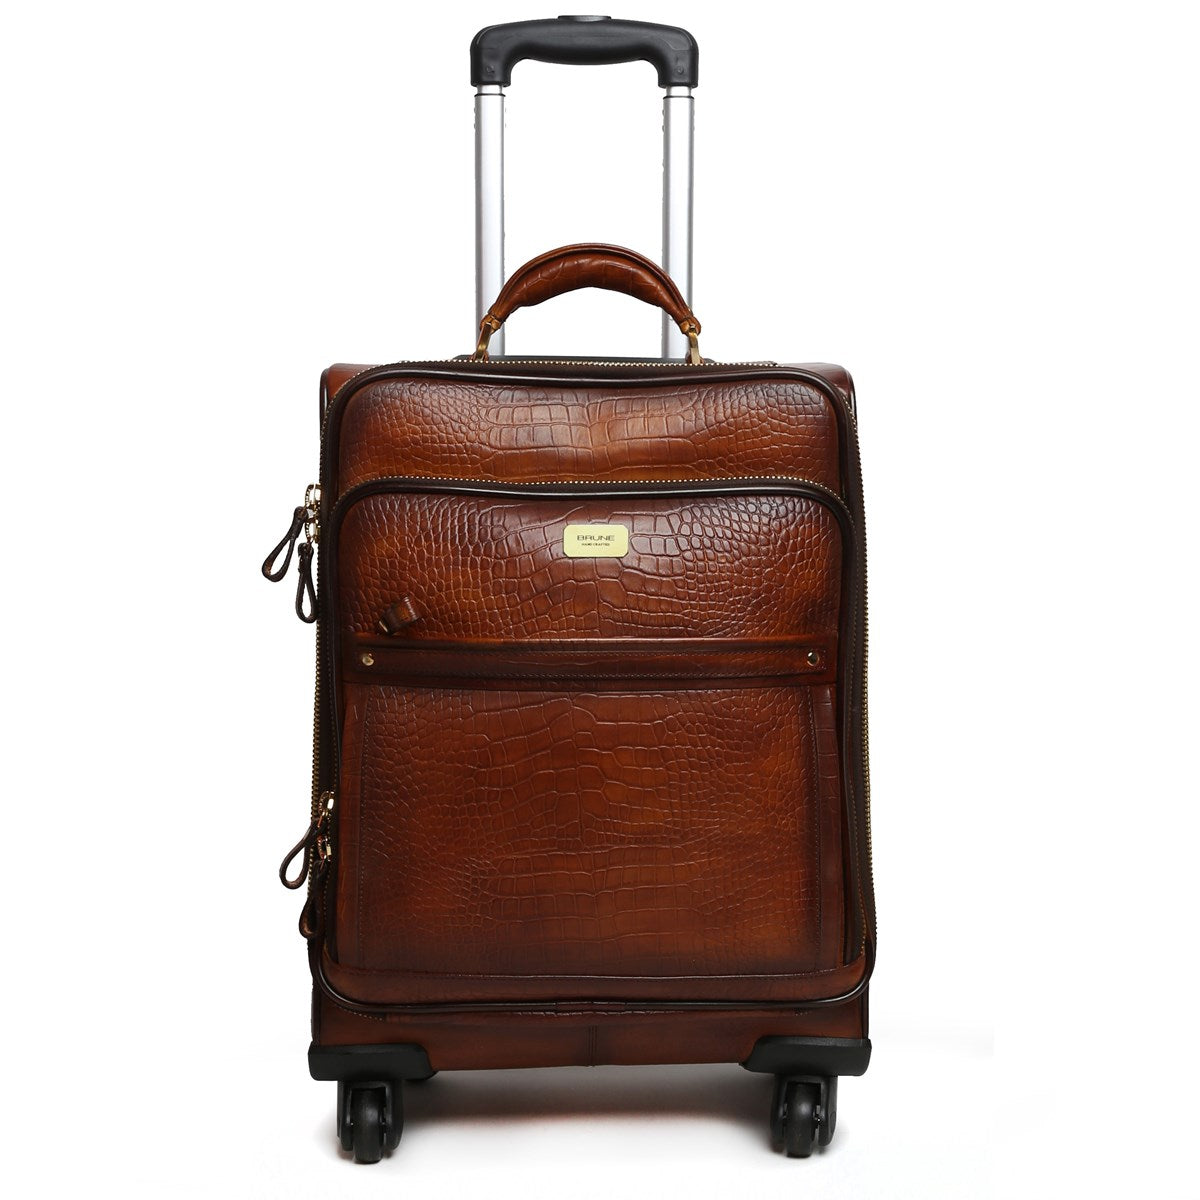 Croco Brown Quad Wheel Cabin Luggage Leather Bag With Golden Metal Zip